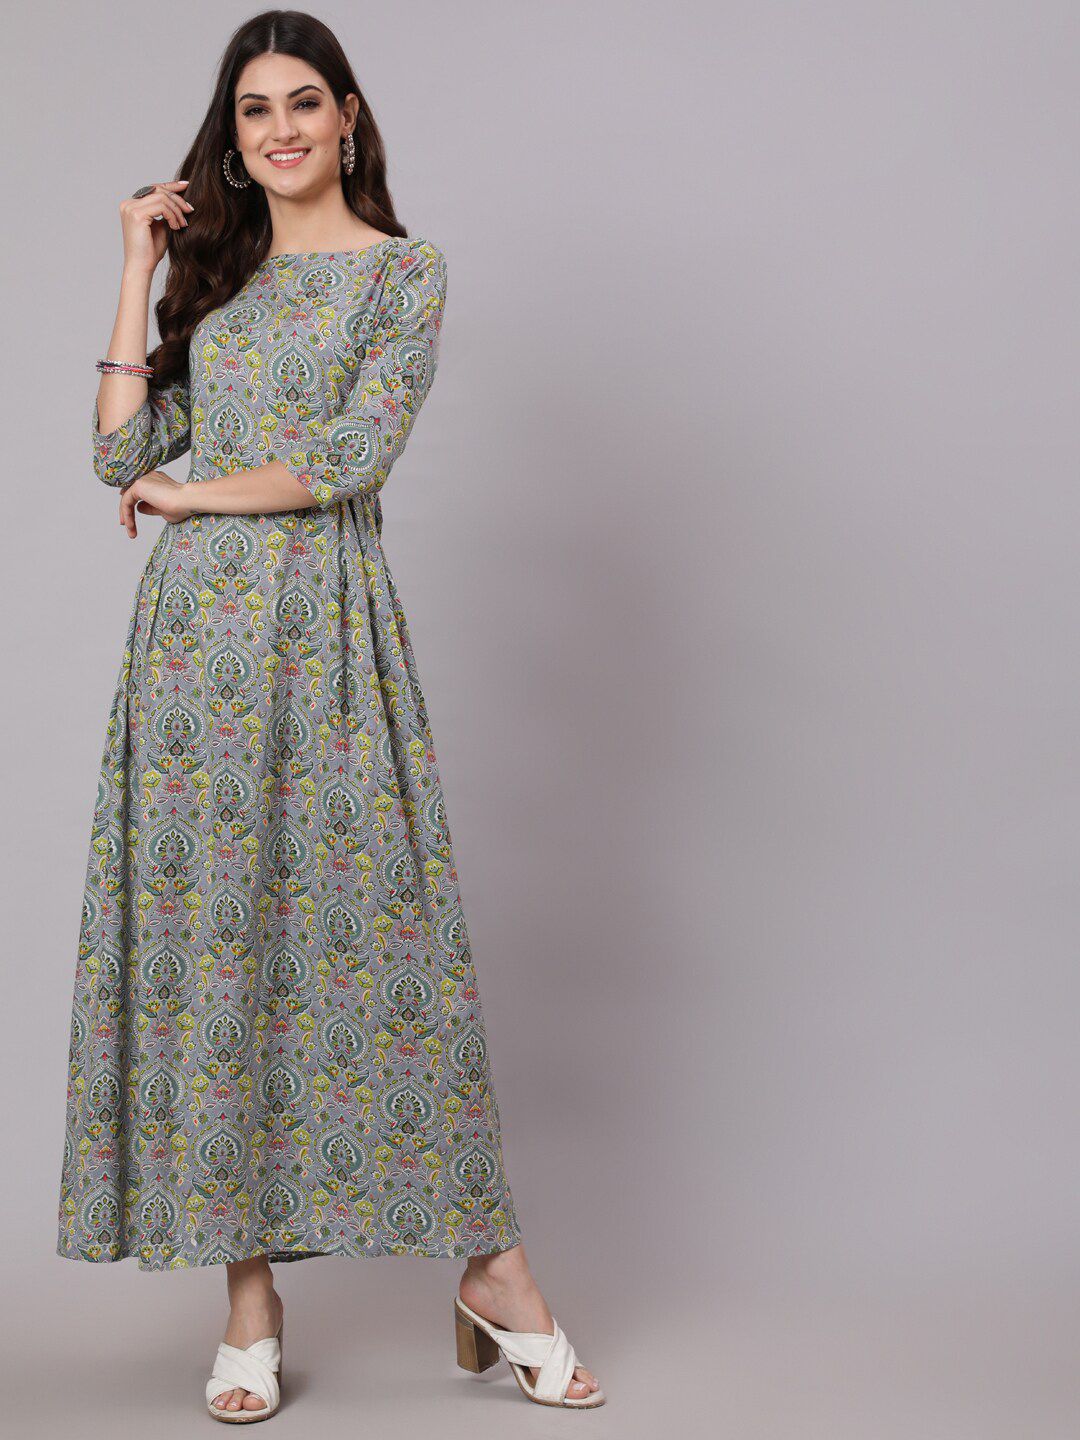 Nayo Grey Floral Ethnic Maxi Dress Price in India